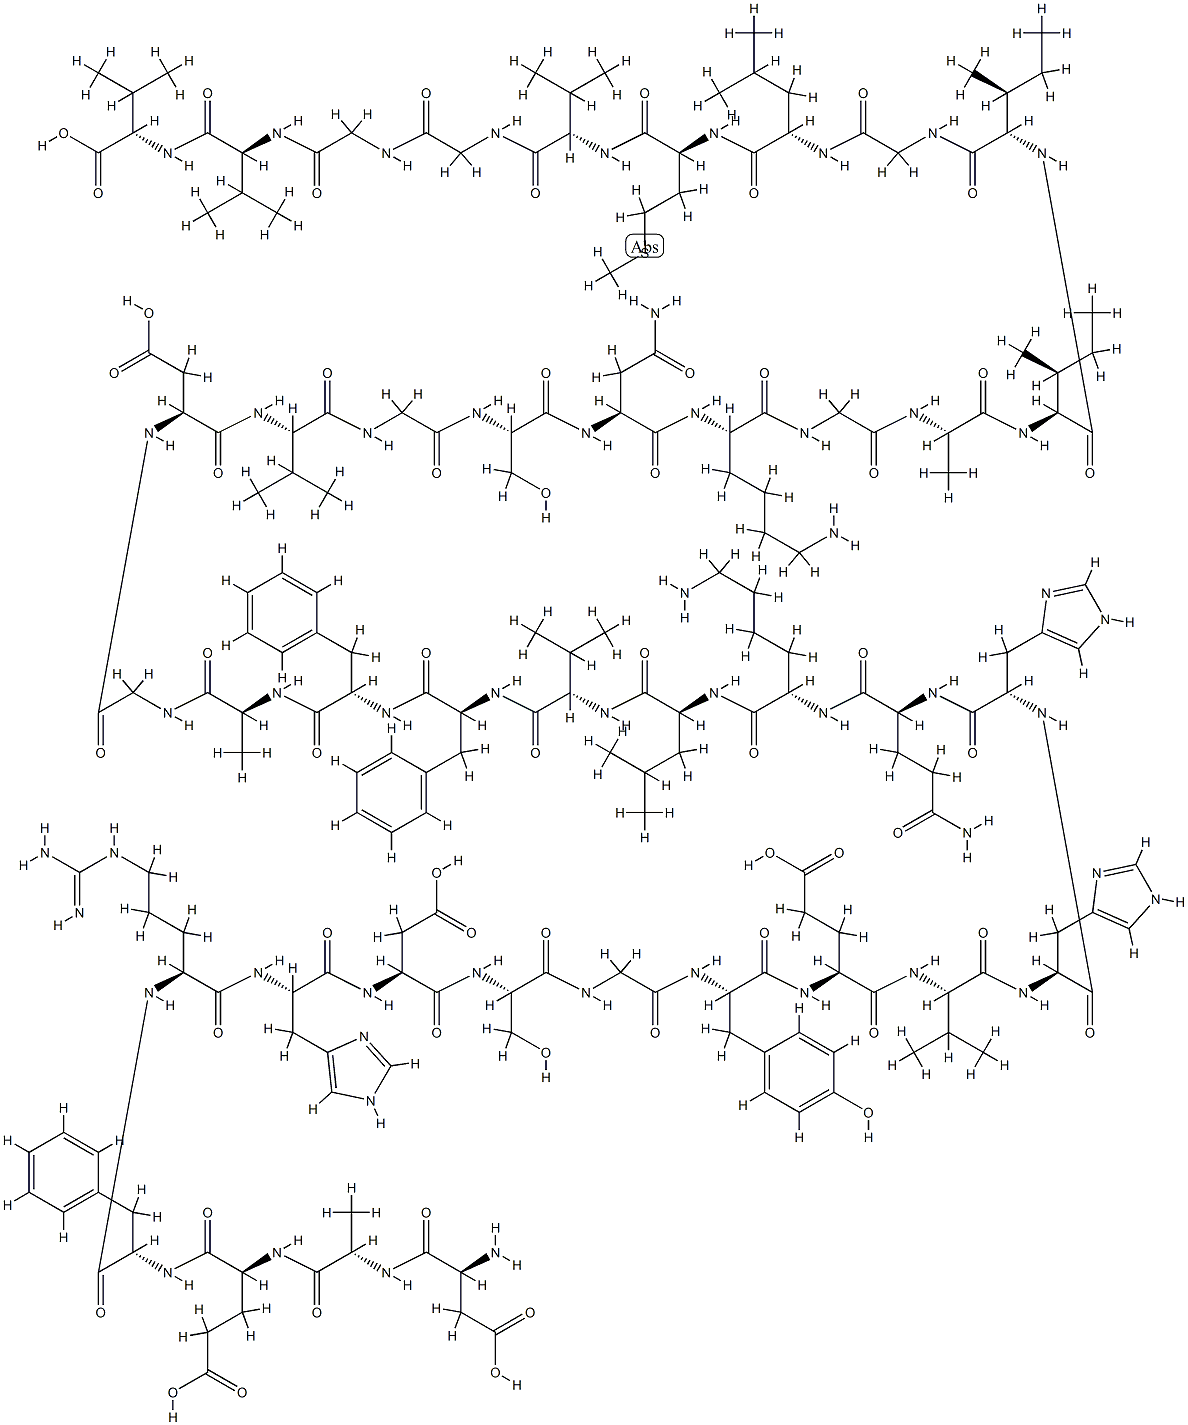 175010-18-1 (GLY22)-AMYLOID Β-PROTEIN (1-40)